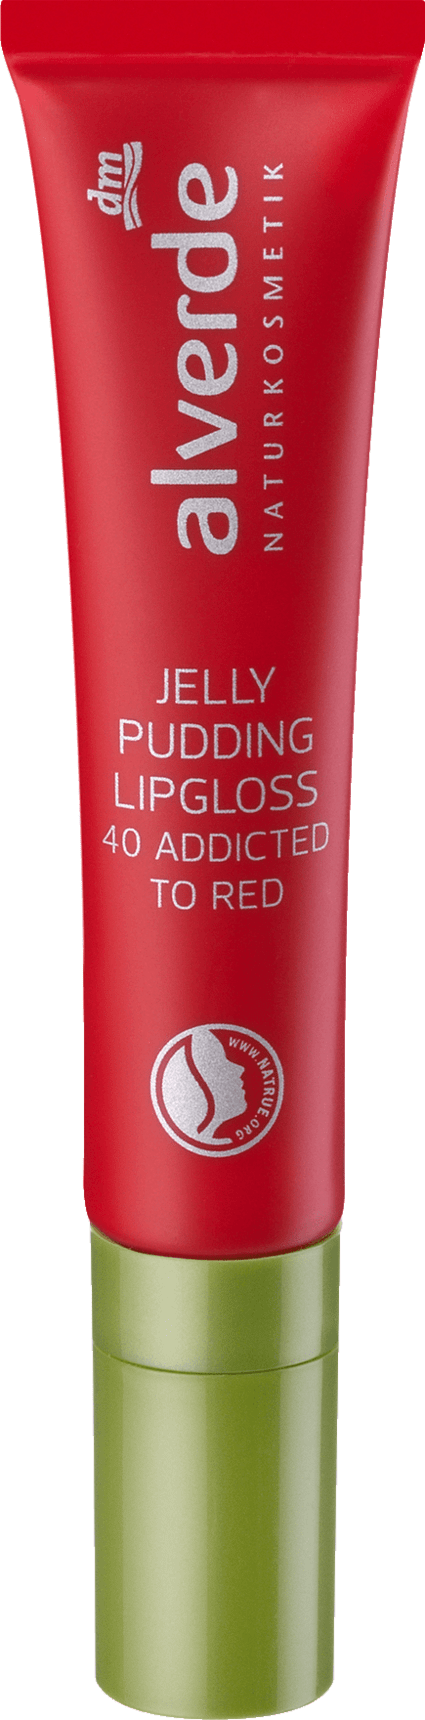 Jelly Pudding Lipgloss 40 Addicted To Red, 10 Ml